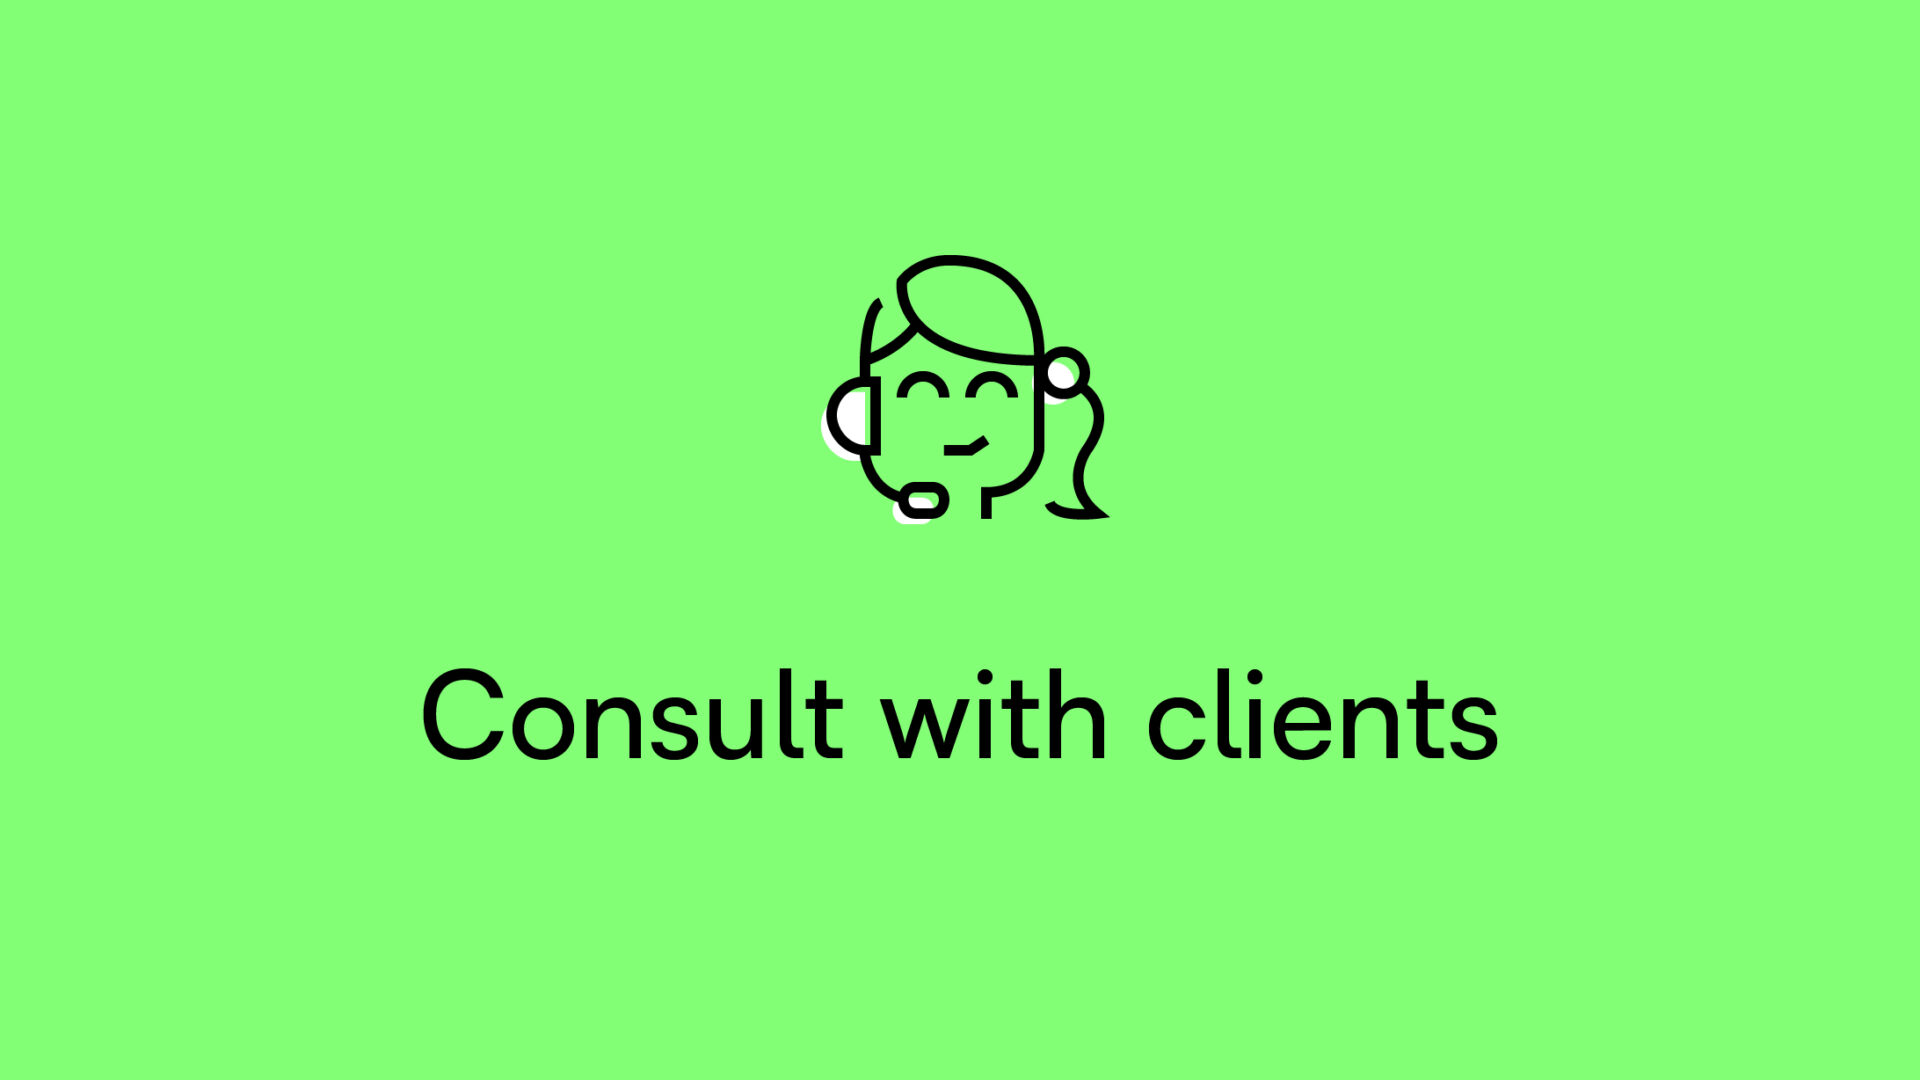 Consult with clients